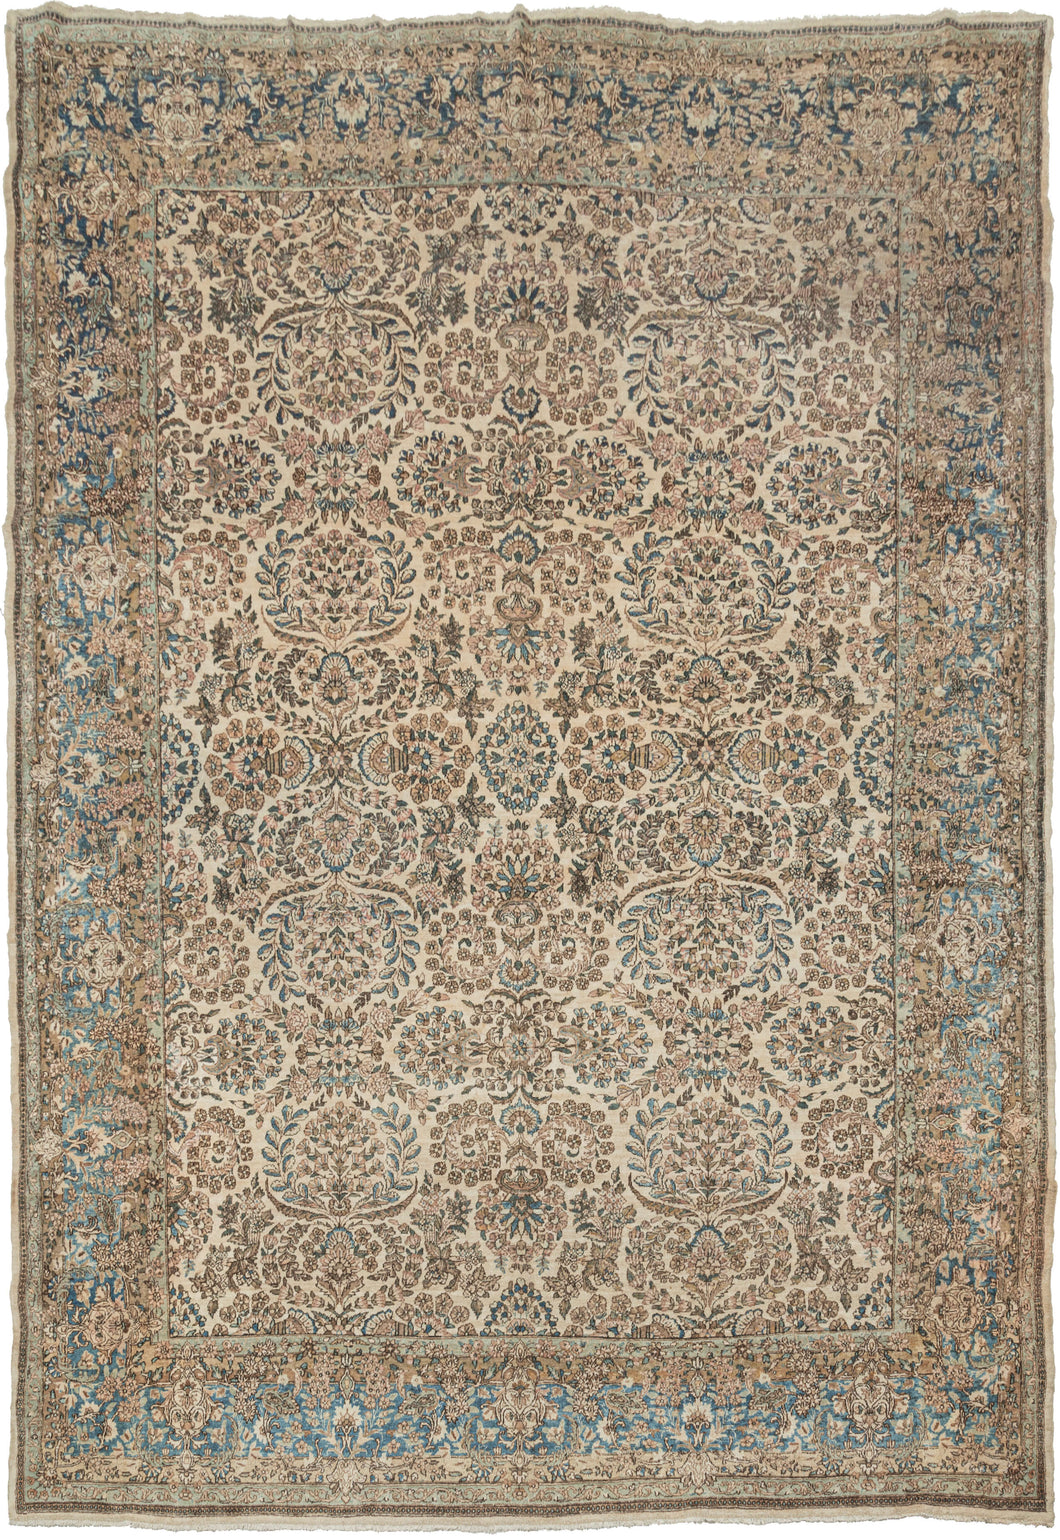 Kerman rug handwoven during the second quarter of the 20th century.  It features an allover design of bouquets and floral sprays in soft tones of pinks, blues and browns on a creamy ivory ground. It is framed by a perfectly reconciled border of blossoming flowers on a light blue ground. Precisely rendered to great visual effect with a soft palette for an understated yet elegant feel.